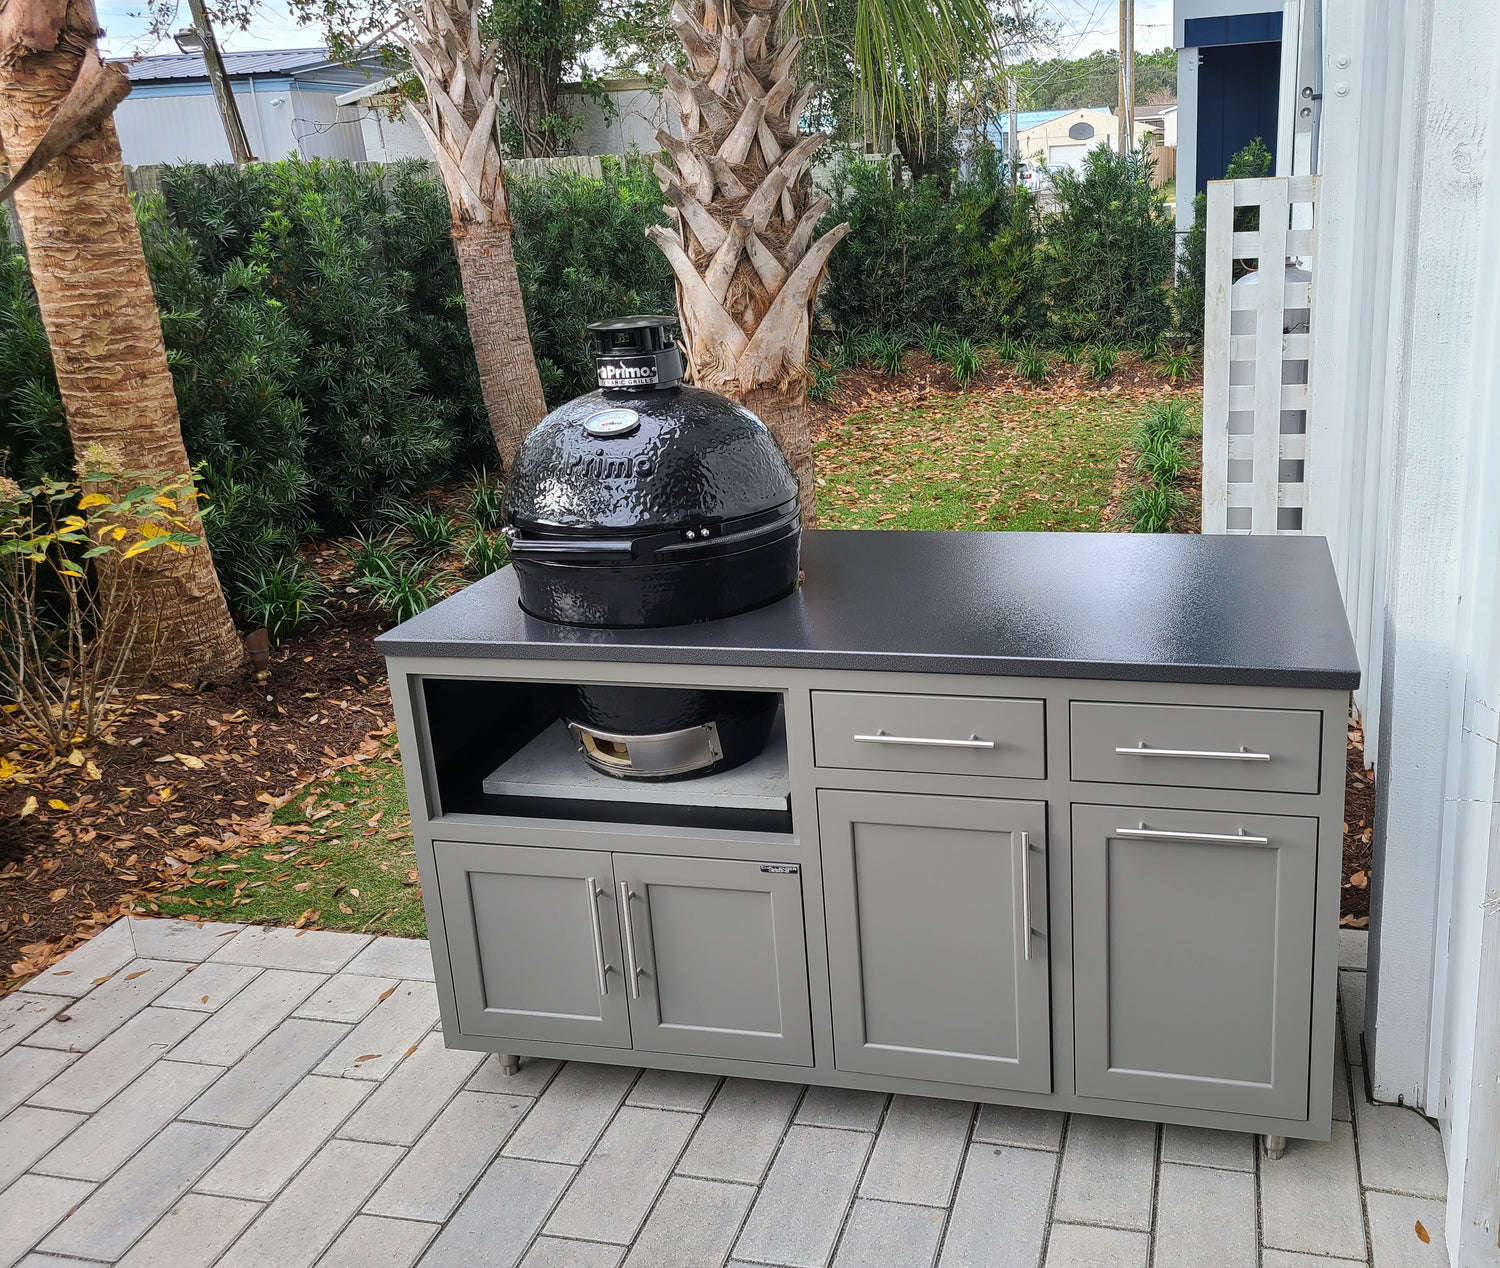 Our Top 10 Outdoor Kitchen Design Tips